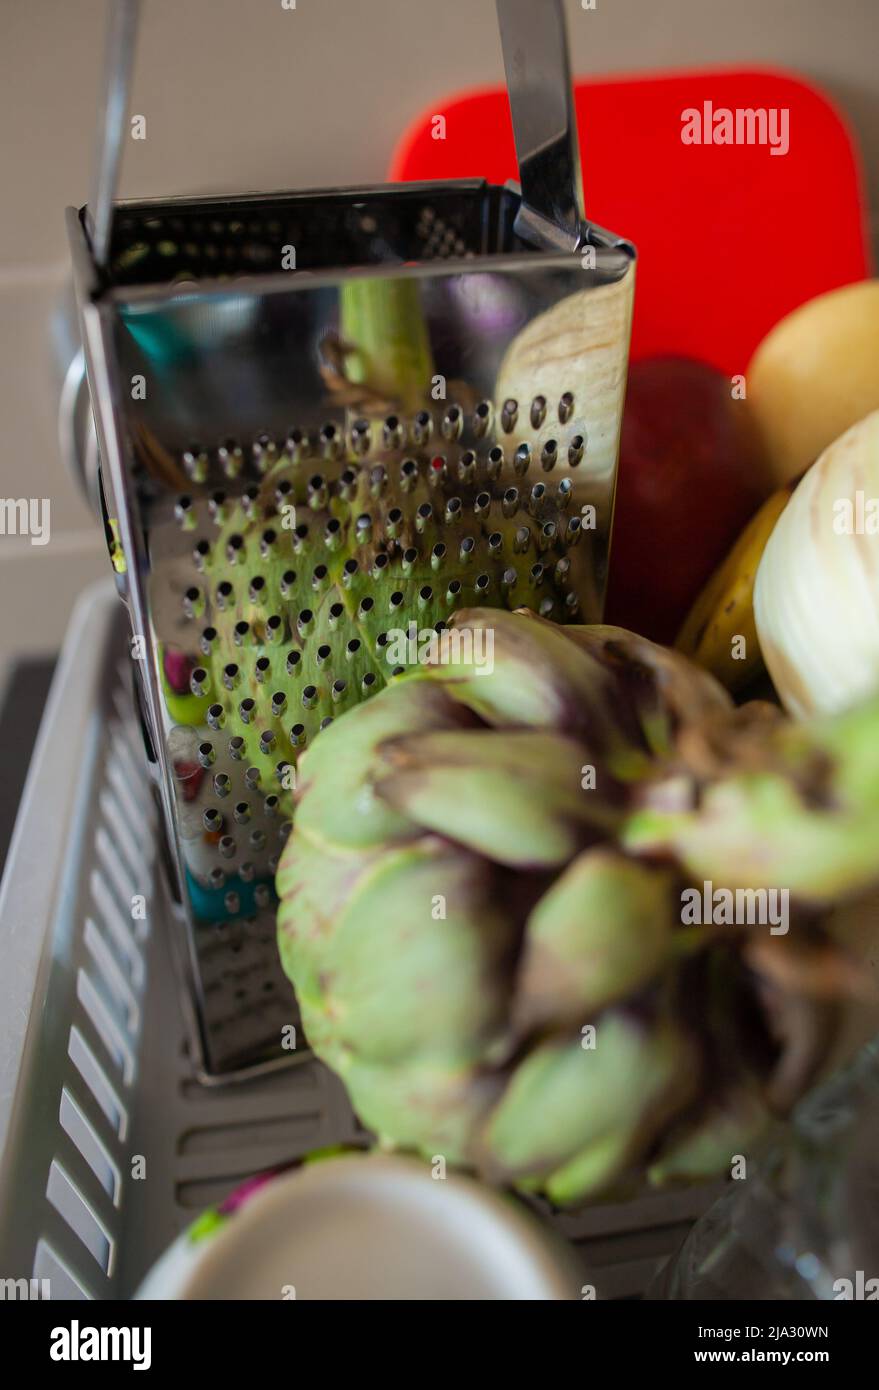 https://c8.alamy.com/comp/2JA30WN/cleaned-vegetables-and-dishes-on-plastic-grey-dish-drying-rack-closeup-artichoke-reflection-in-silver-grater-on-dish-drying-rack-with-other-vegetables-2JA30WN.jpg